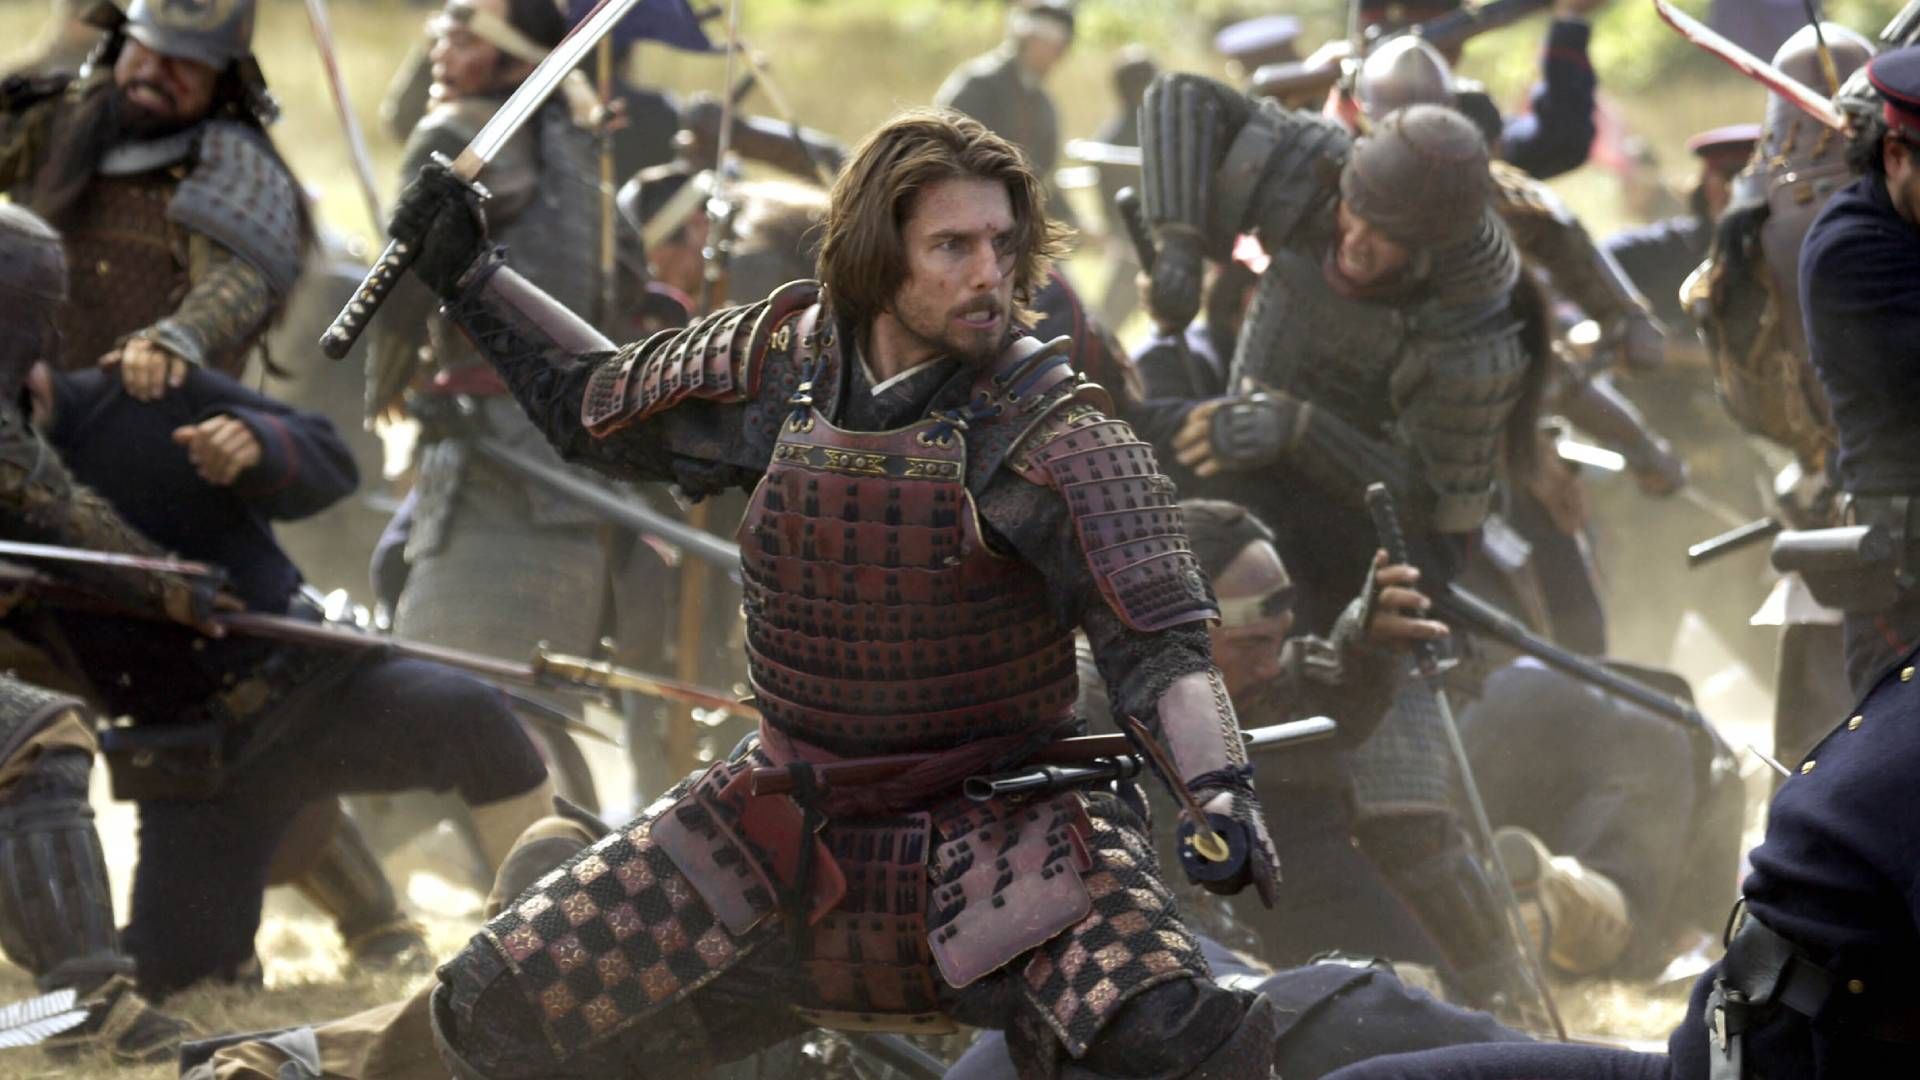 <p>                     Tom Cruise’s period epic The Last Samurai sees him play military veteran Nathan Algren who befriends samurai Katsumoto (Ken Watanabe) after he decides to spare him. Over the course of the film, the pair develop a bond as Algren is trained in the ways of Japanese swordsmanship. This all leads to the movie’s most poignant moment after Katsumoto has been killed, as Algren presents his sword to Emperor Meiji. "Tell me how he died," the ruler asks, to which Algren emotionally replies, "I will tell you how he lived." The subtext here is pretty clear: do not forget the ways of traditions of the samurai as Japan modernizes.                   </p>